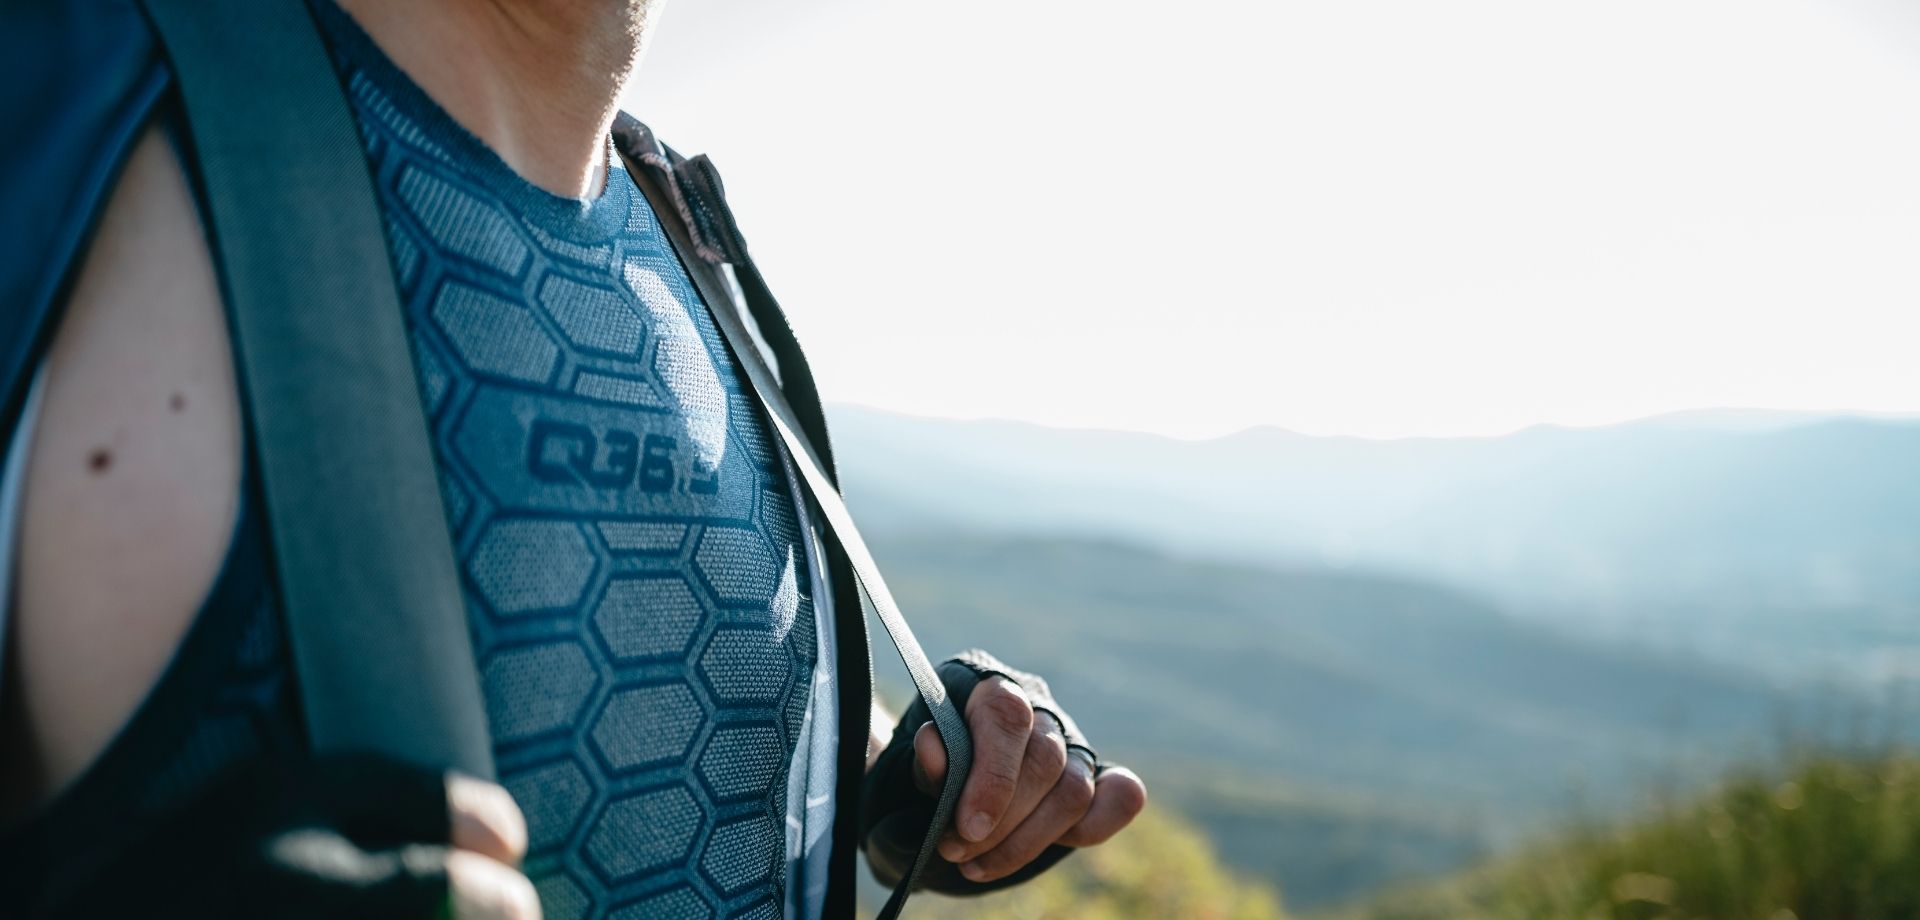 Q36.5 Base Layer 1 Sleeveless | Strictly Bicycles